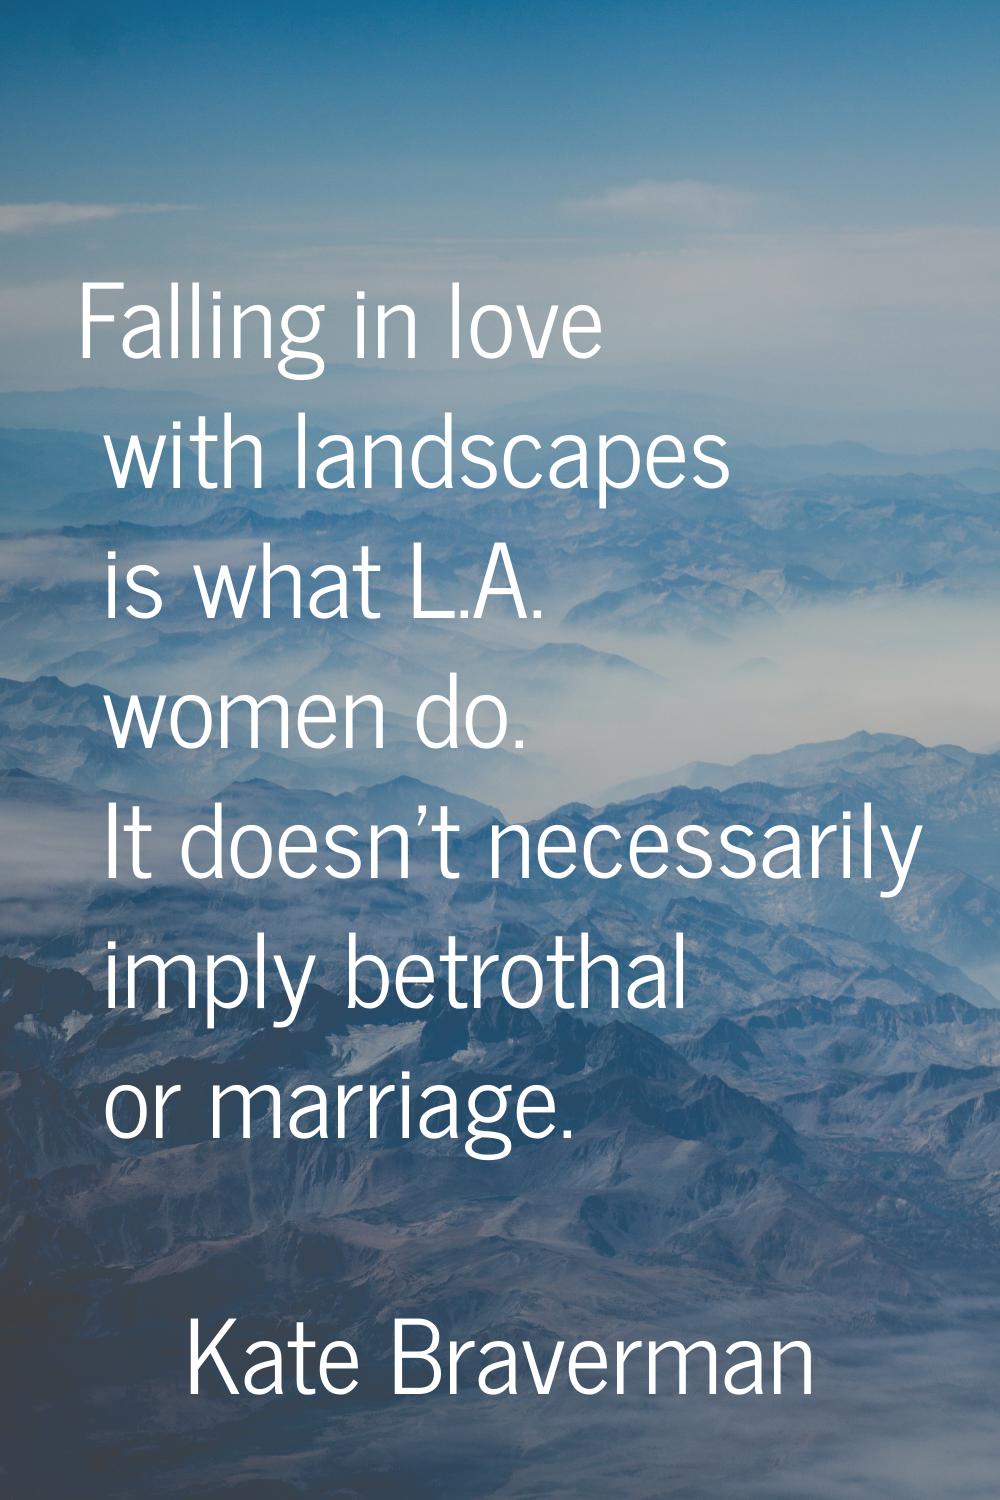 Falling in love with landscapes is what L.A. women do. It doesn't necessarily imply betrothal or ma